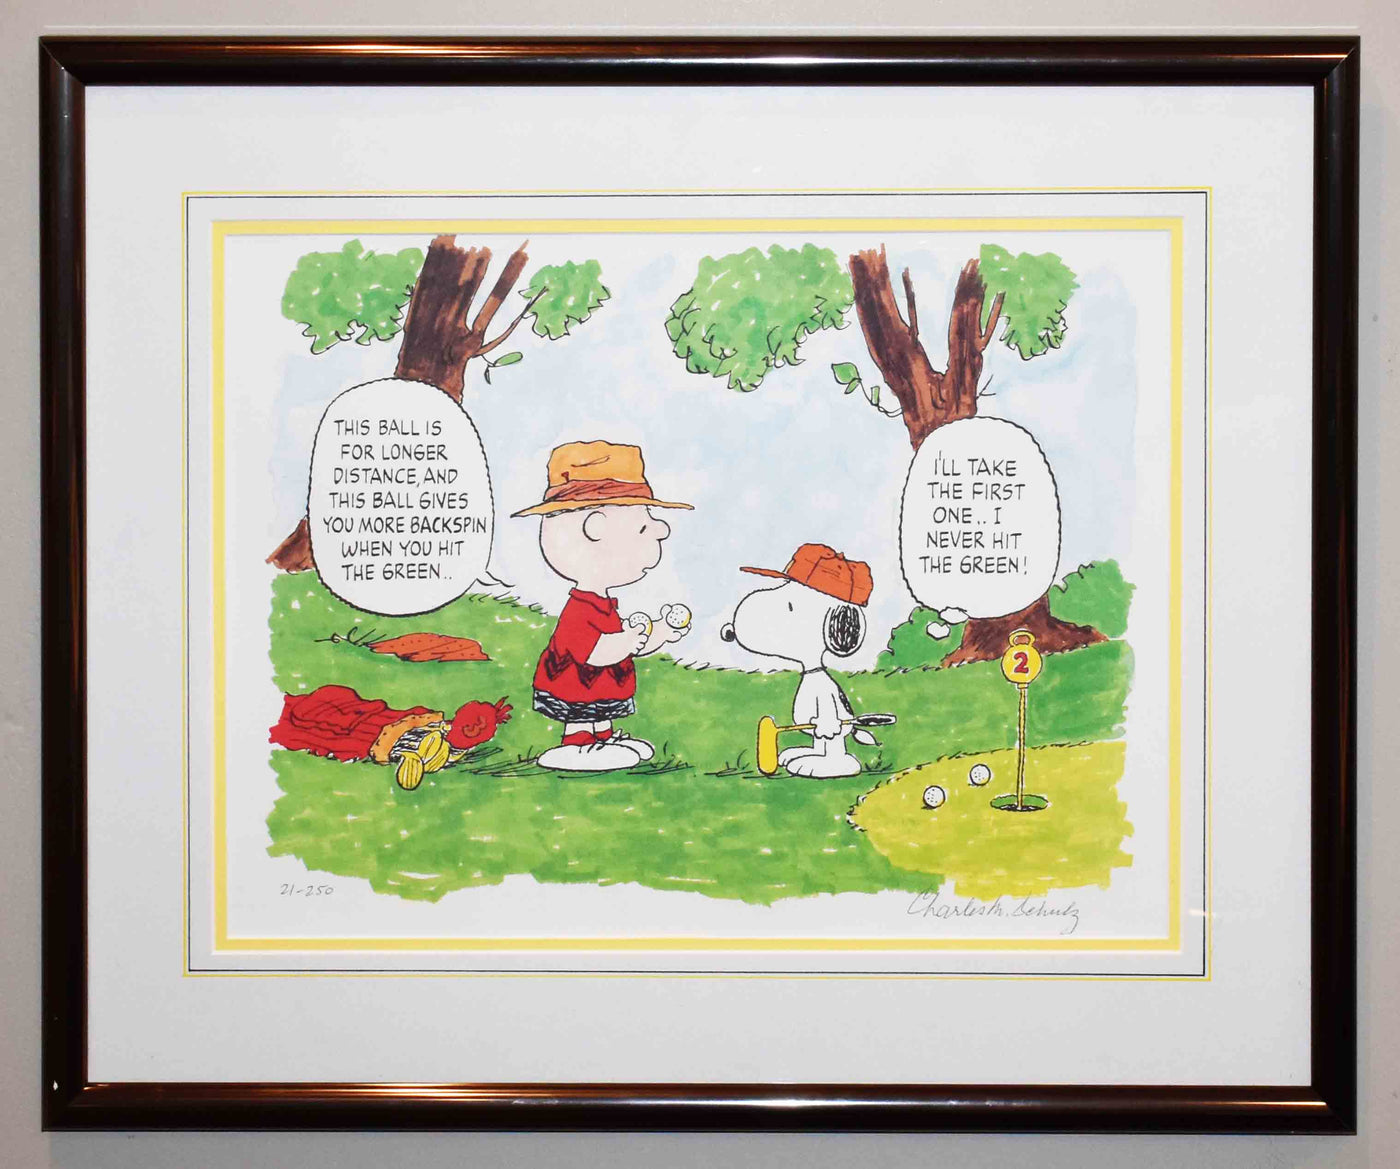 Peanuts Animation Art Limited Edition Lithograph "Hitting the Green"